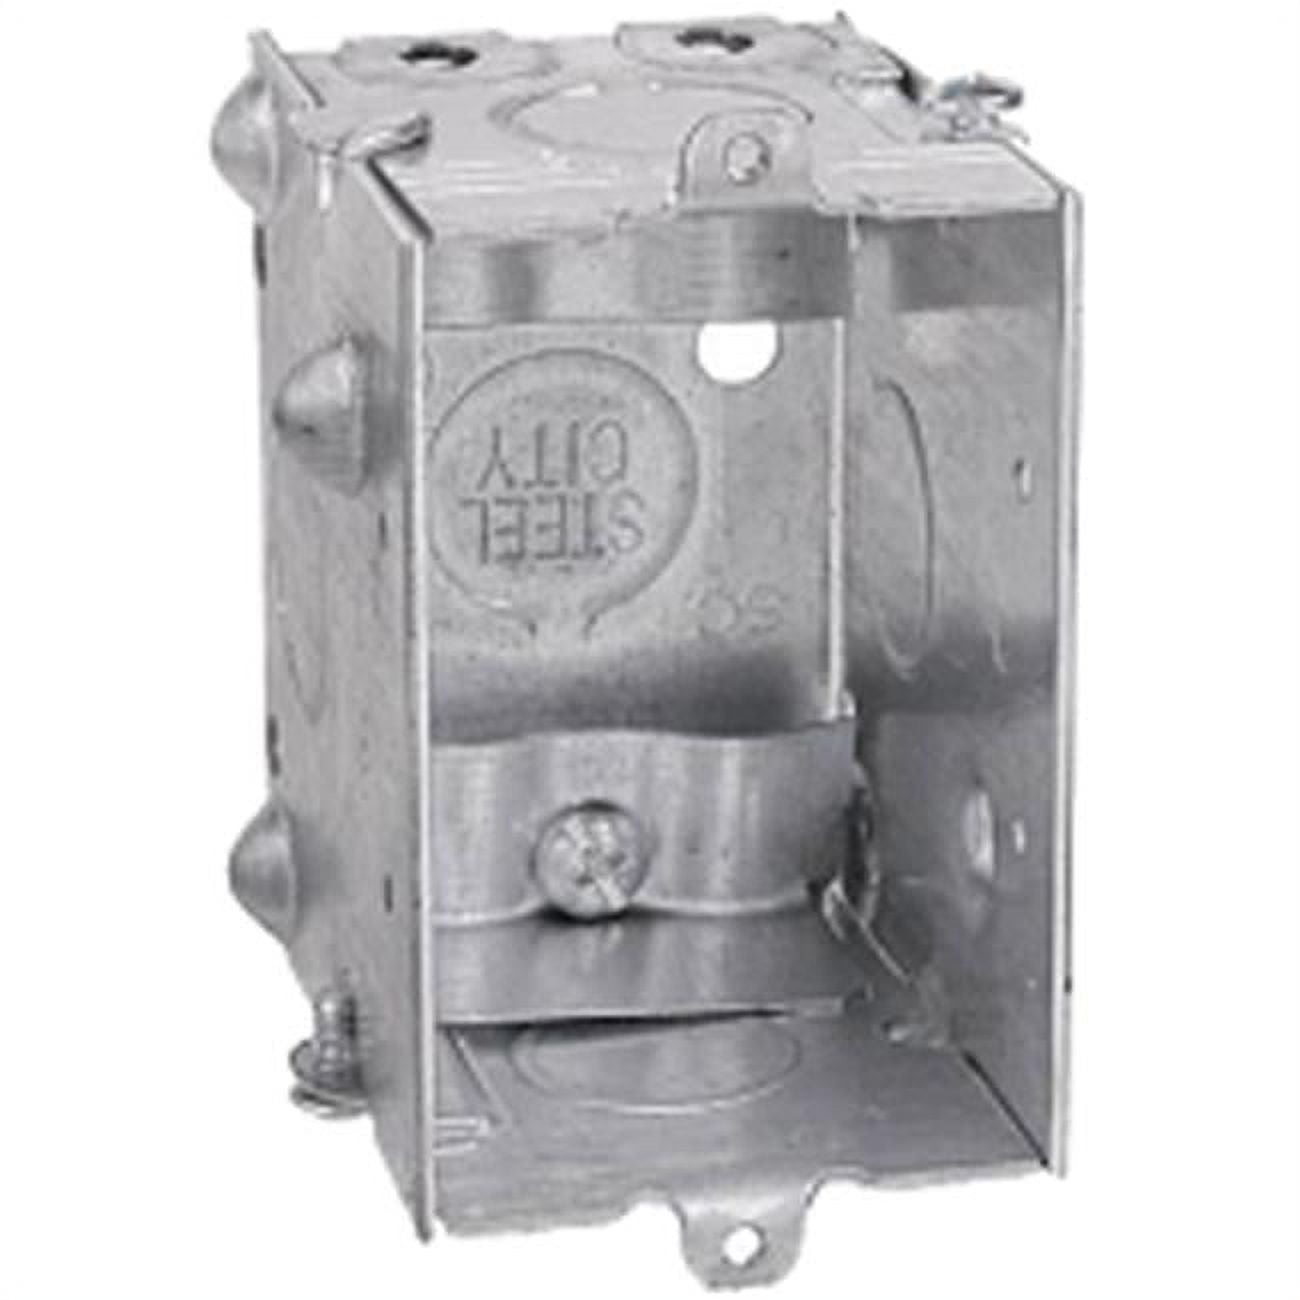 Picture of Thomas & Betts LXWLE-25 Gangable Switch Box with Clamps - 3 x 2 x 2.5 in.